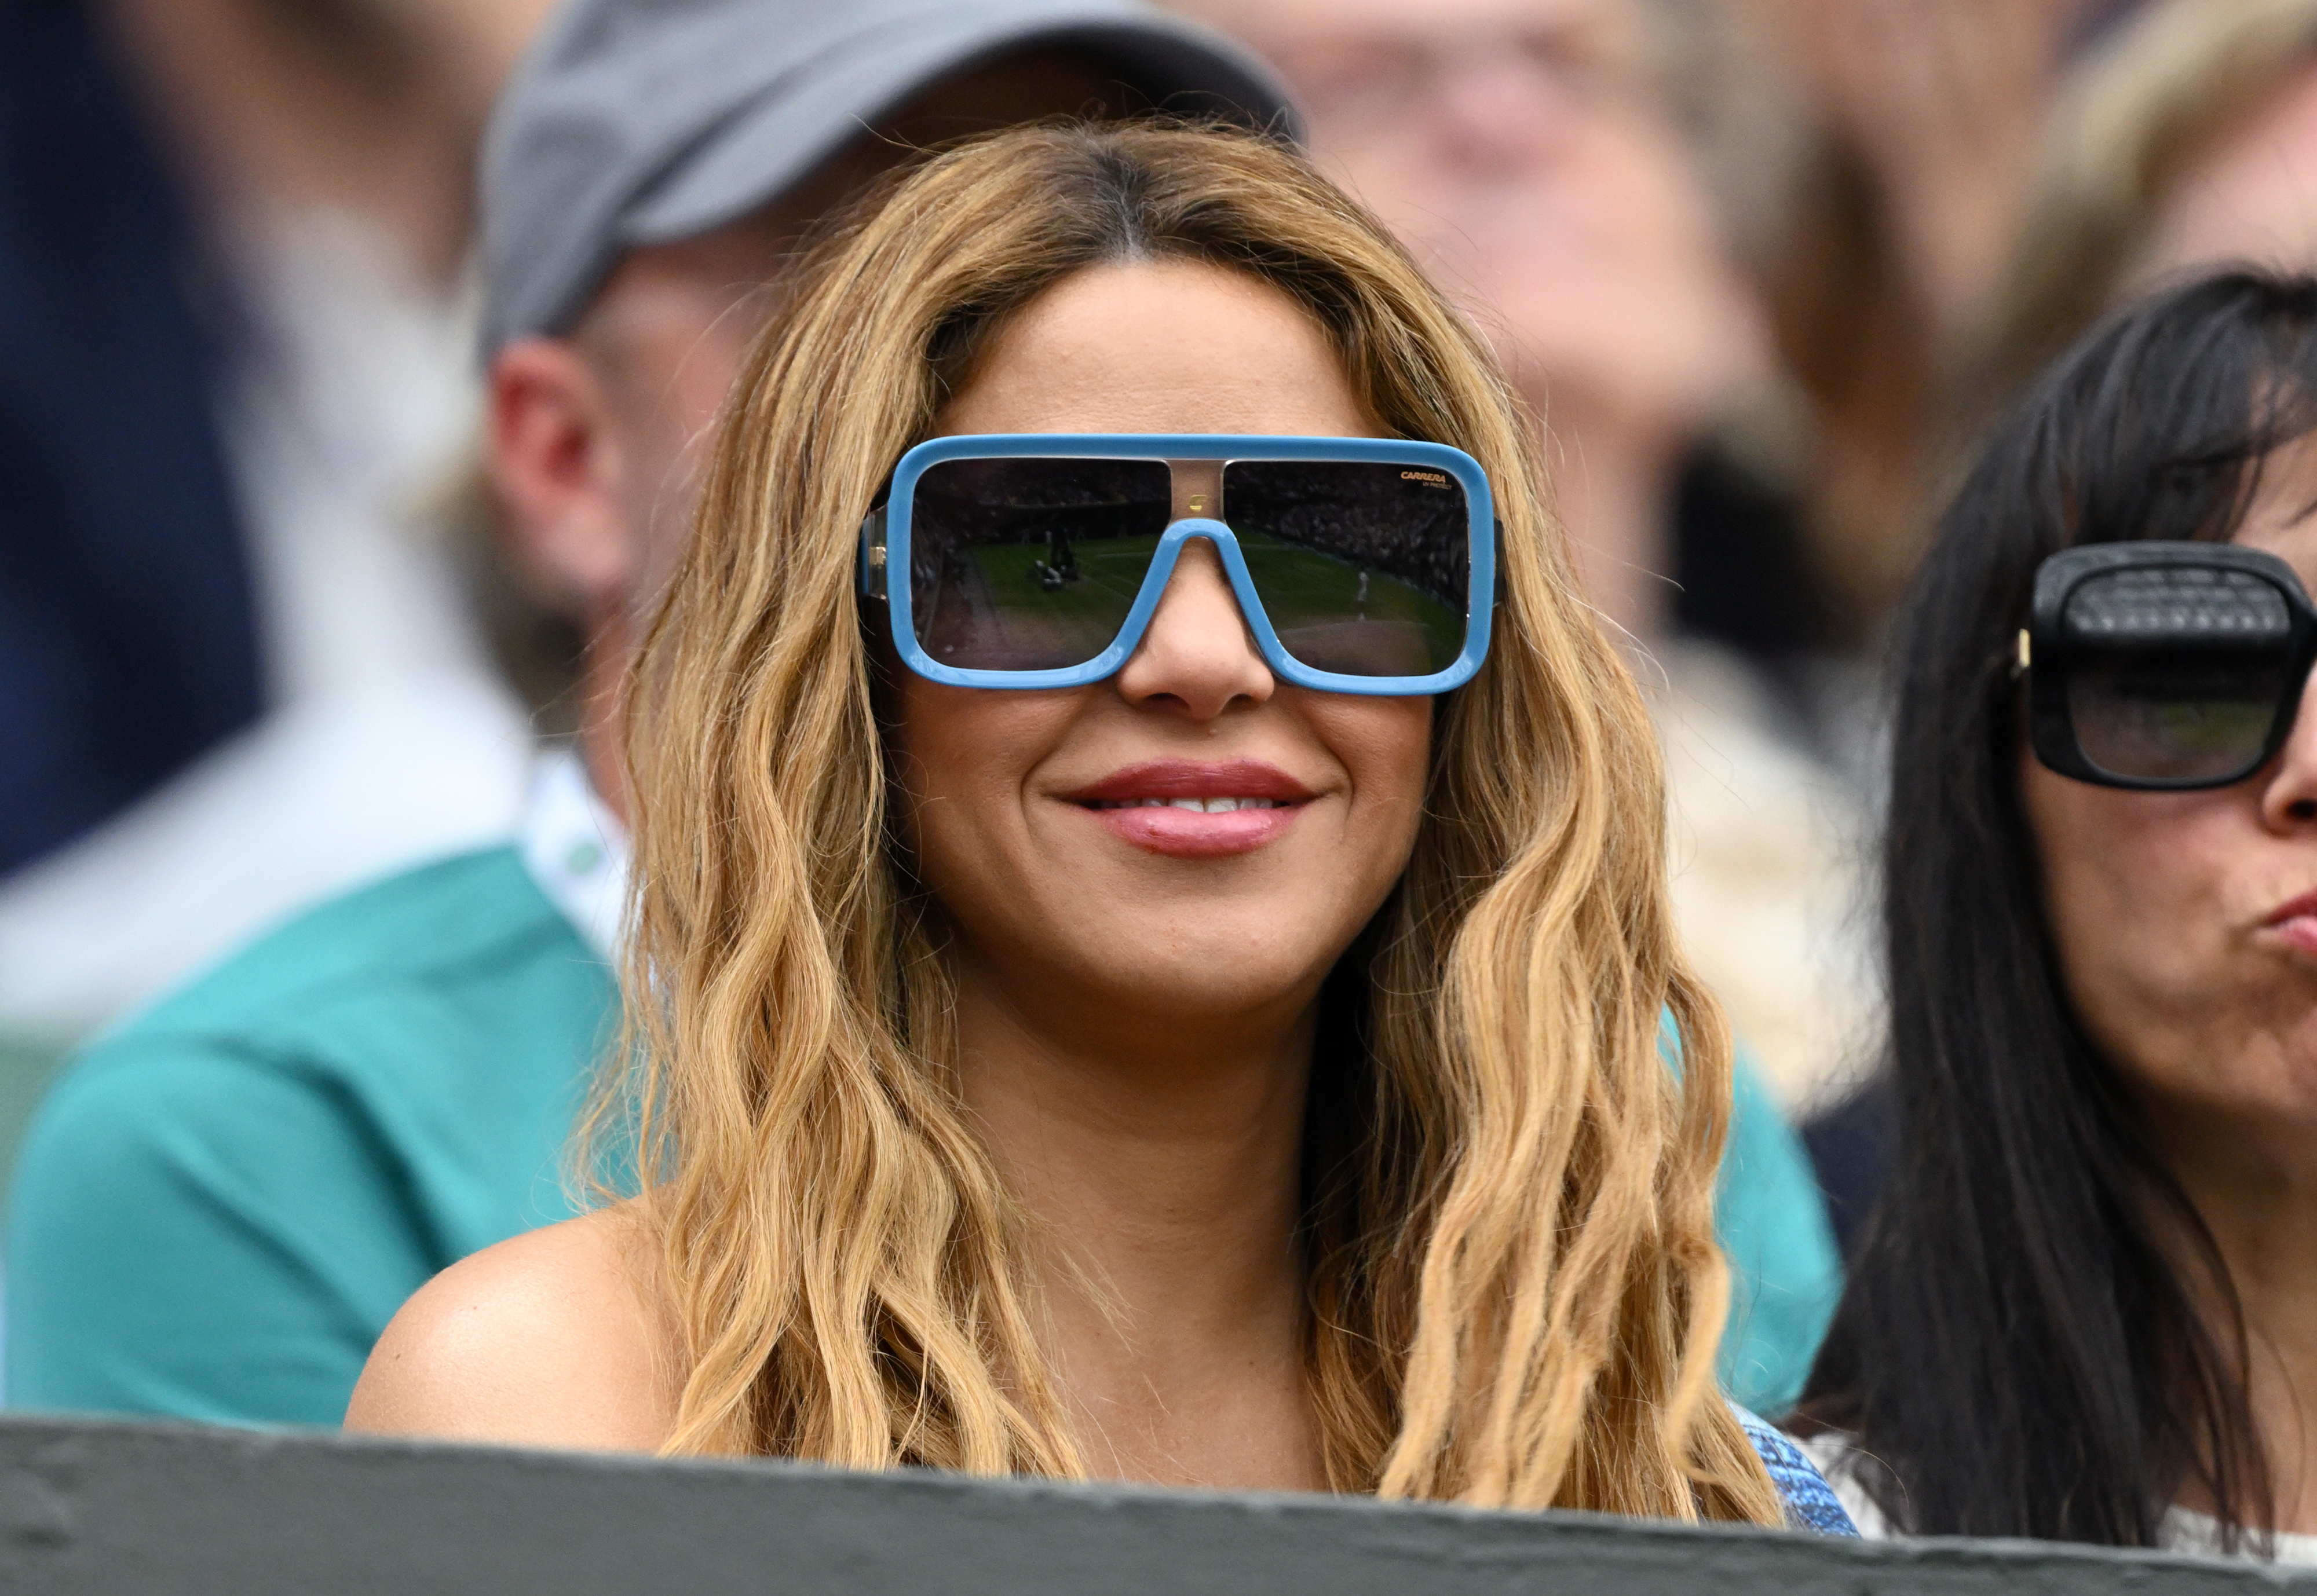 Closeup of Shakira sitting at an outdoor event with sunglasses